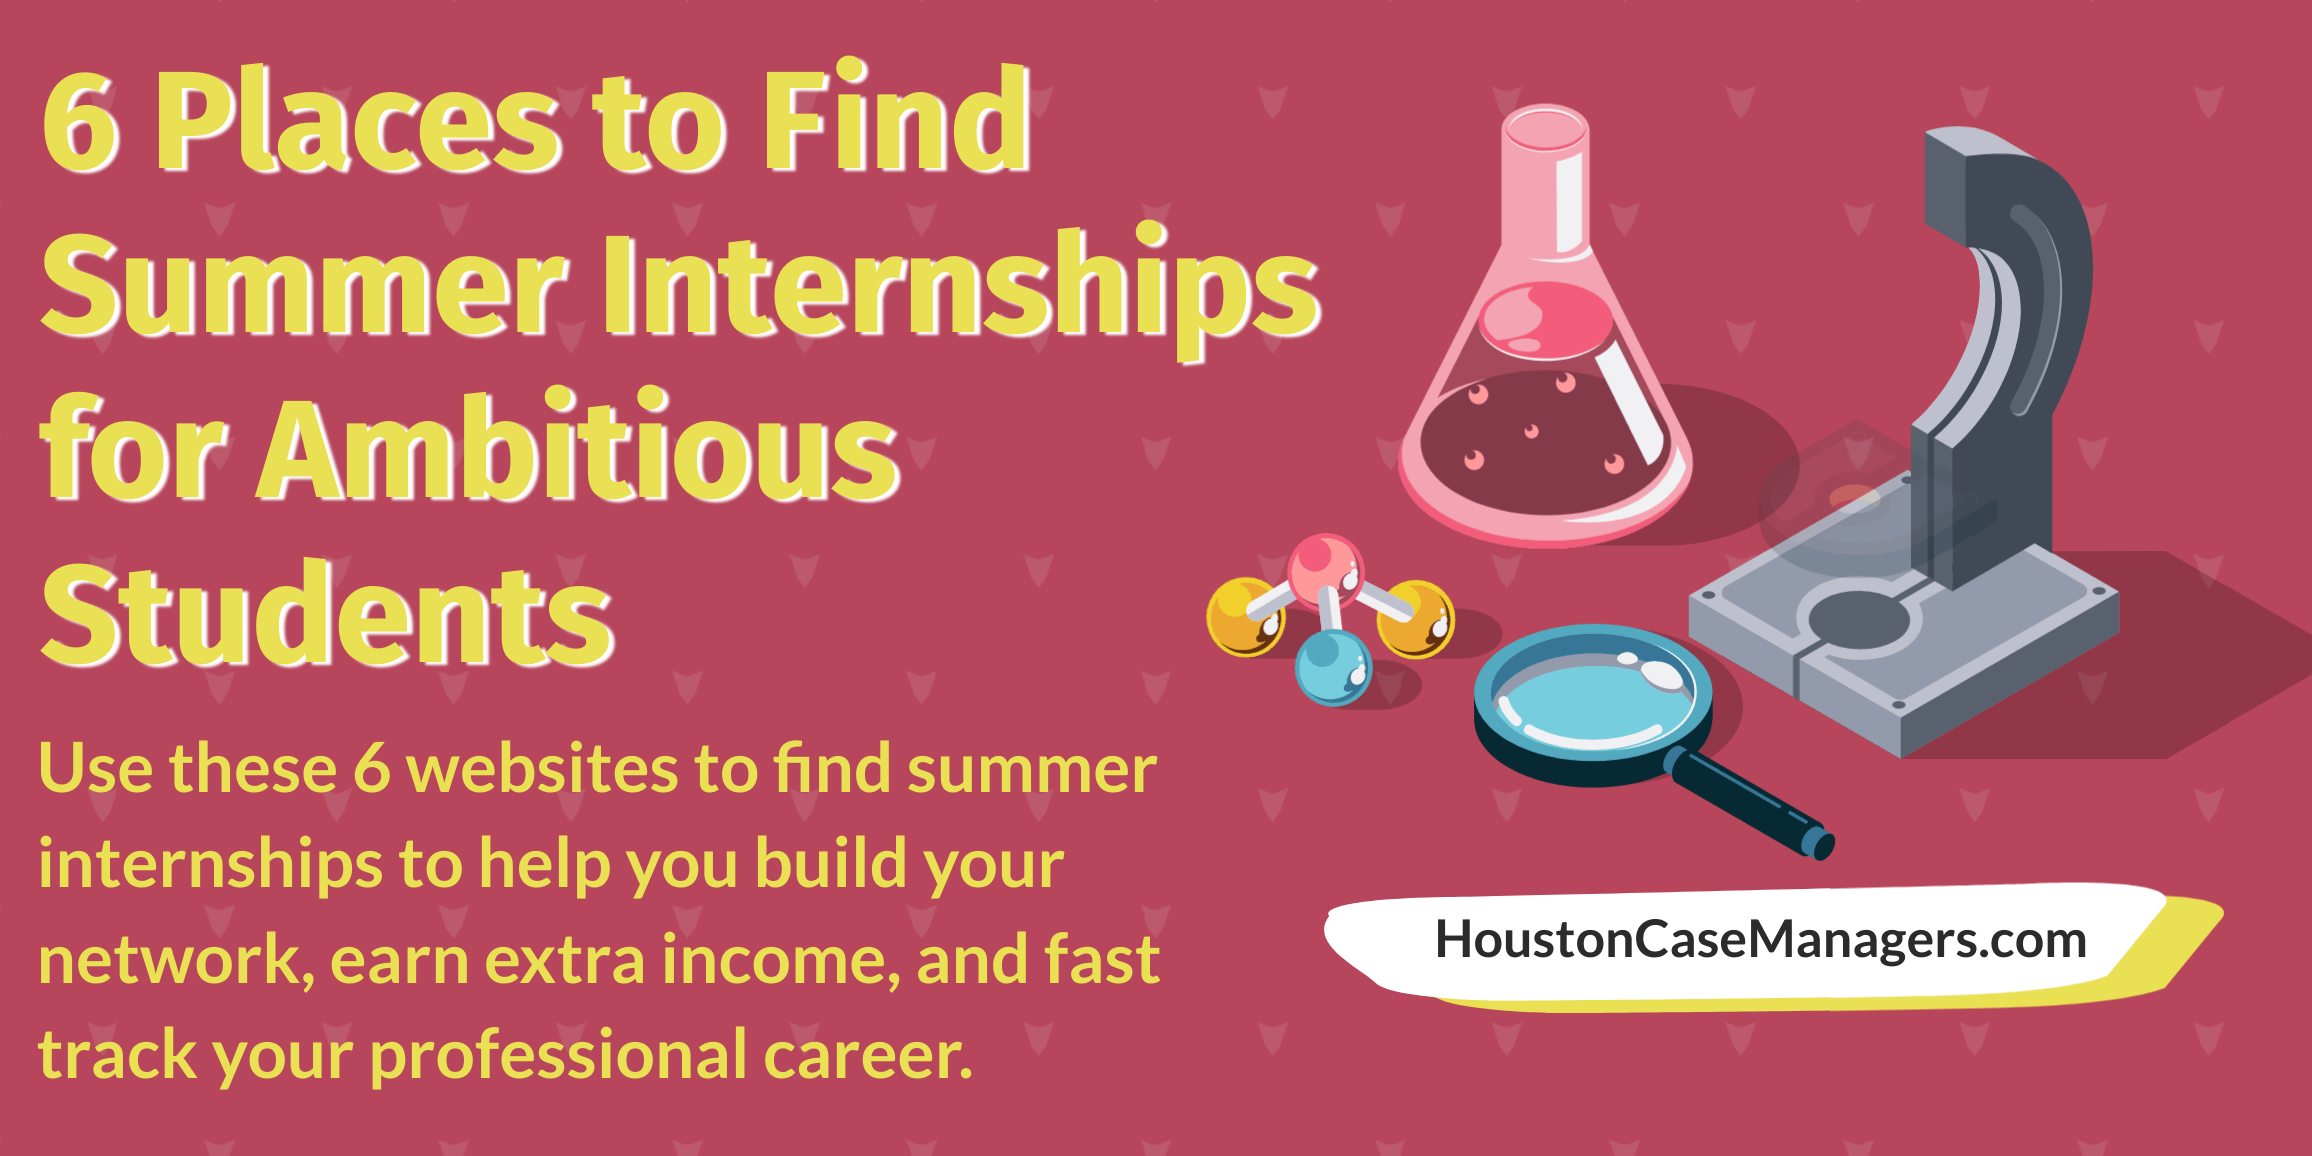 6 Places to Find Summer Internships for Ambitious Students